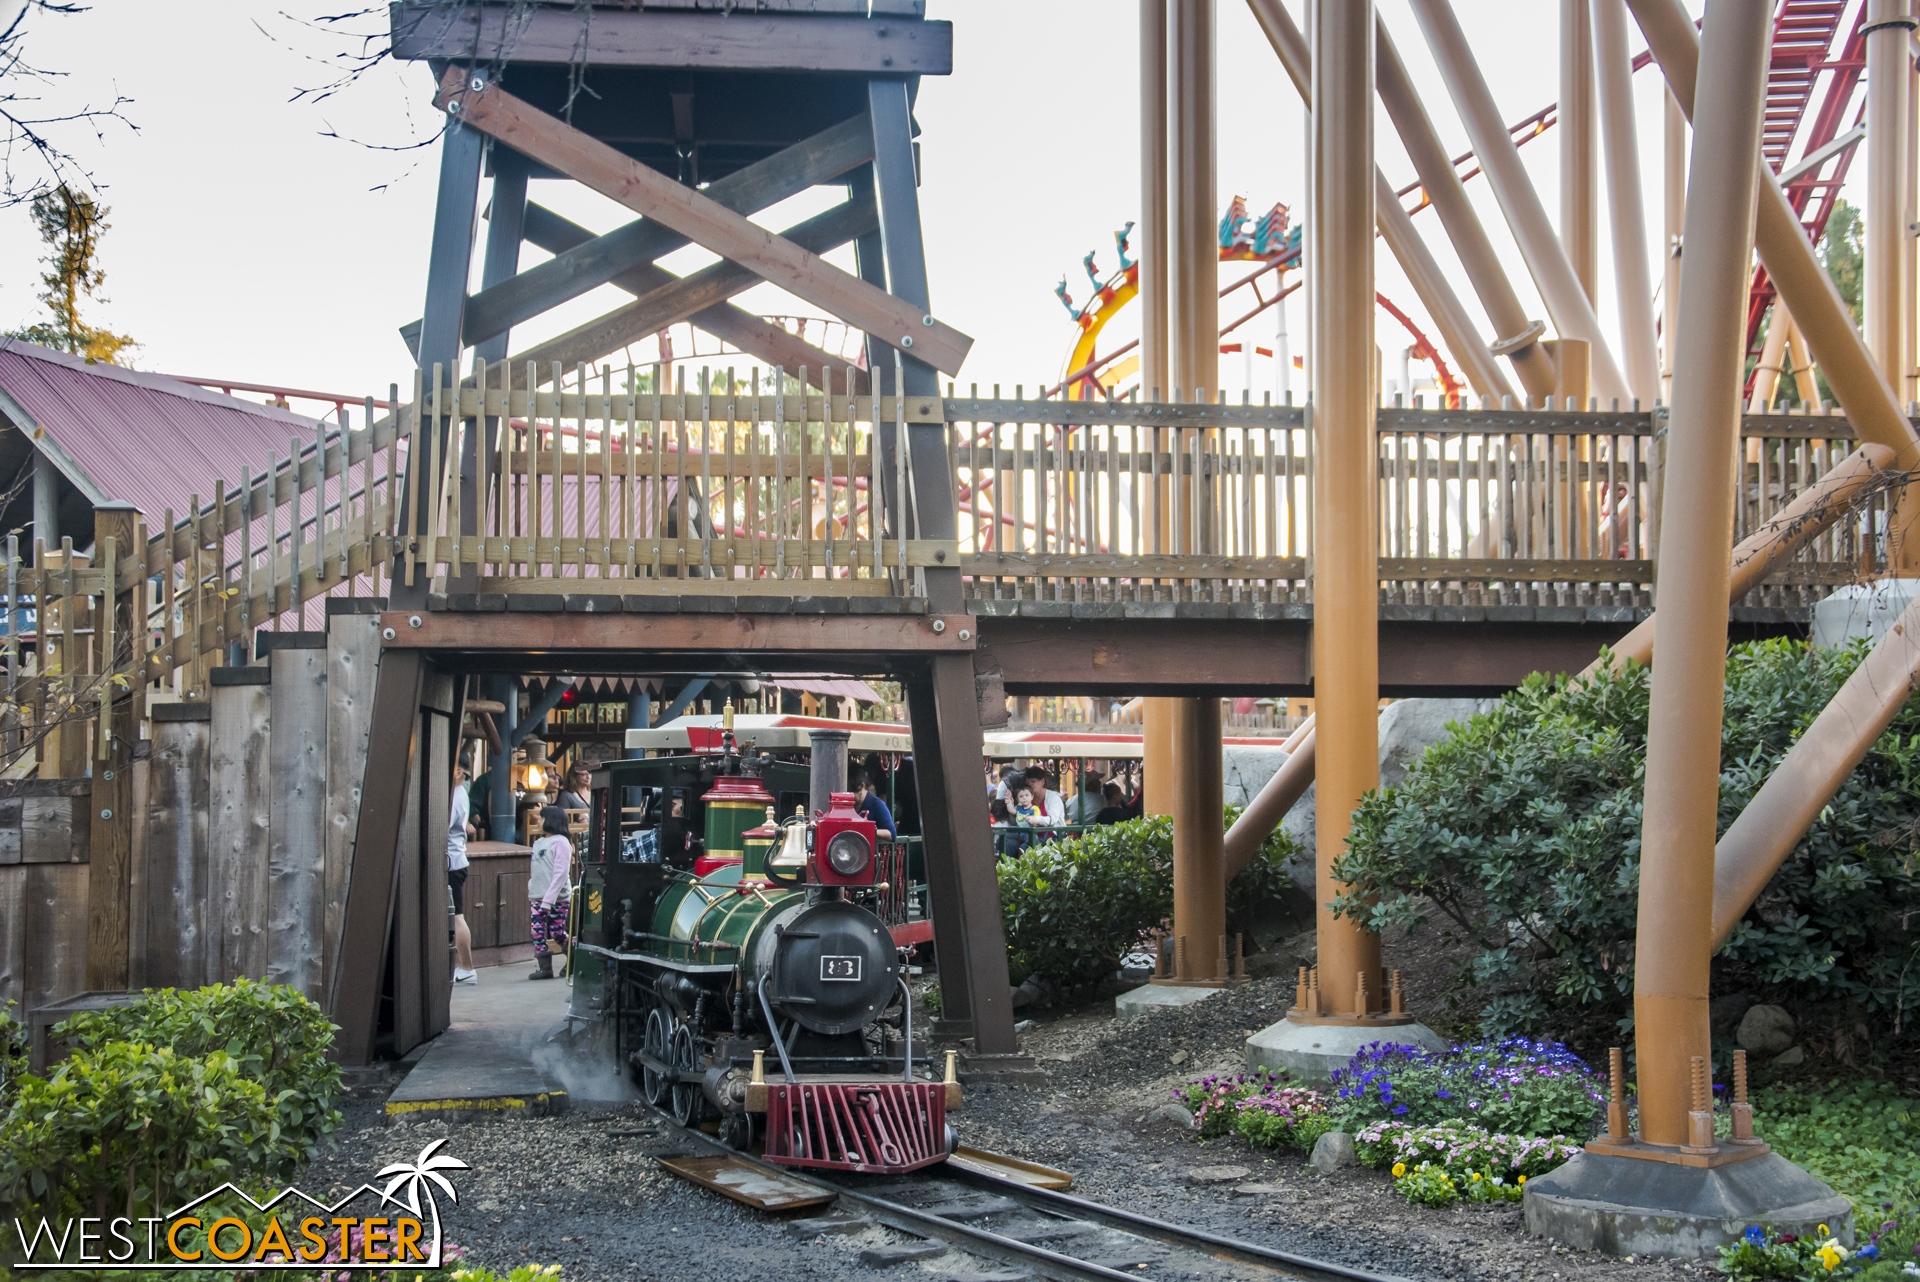  The Grand Sierra Railroad has received an overhaul for the Peanuts Celebration. 